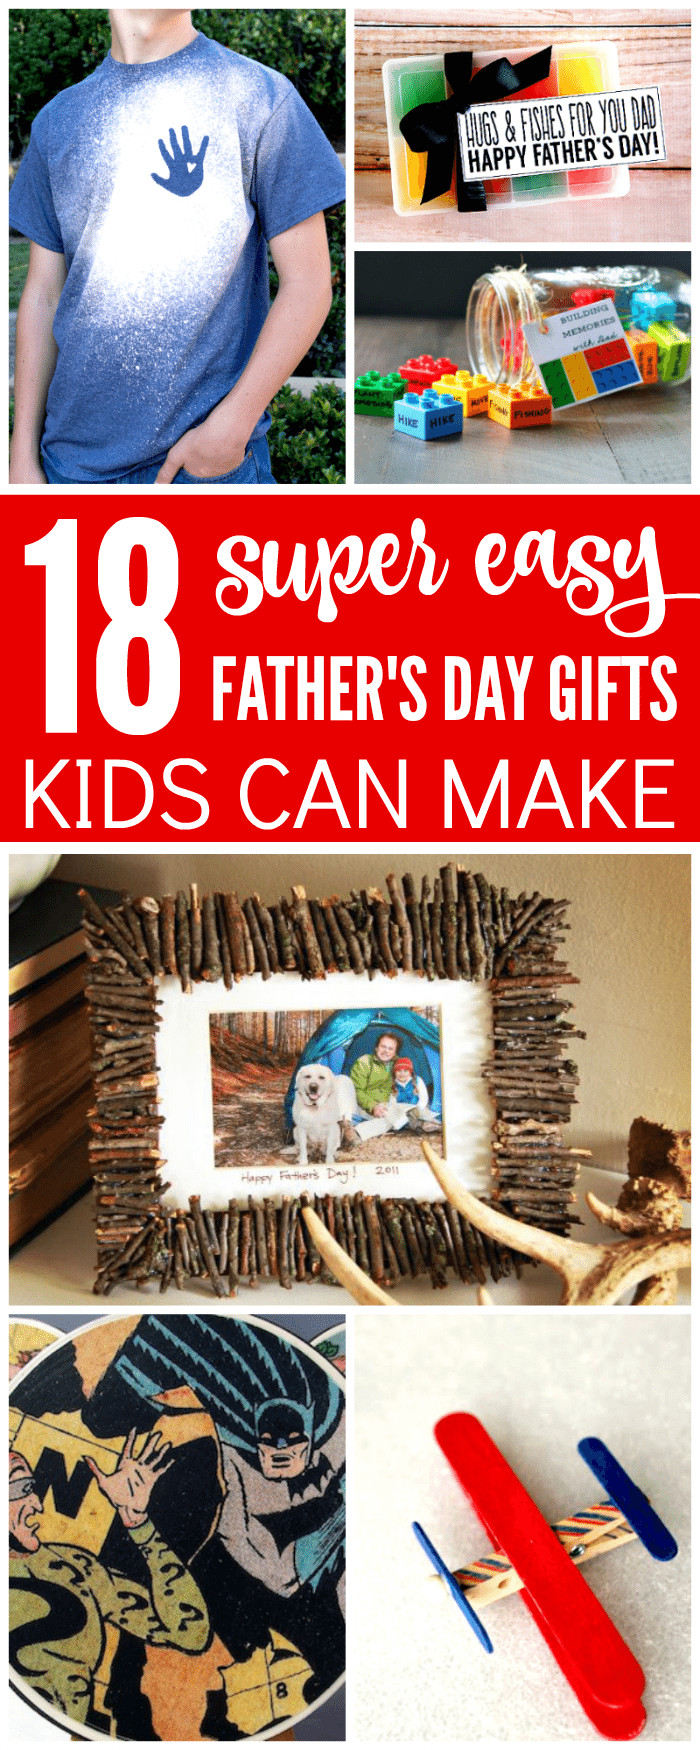 Fathersday Gifts From Kids
 18 Easy Father s Day Gifts Kids Can Make